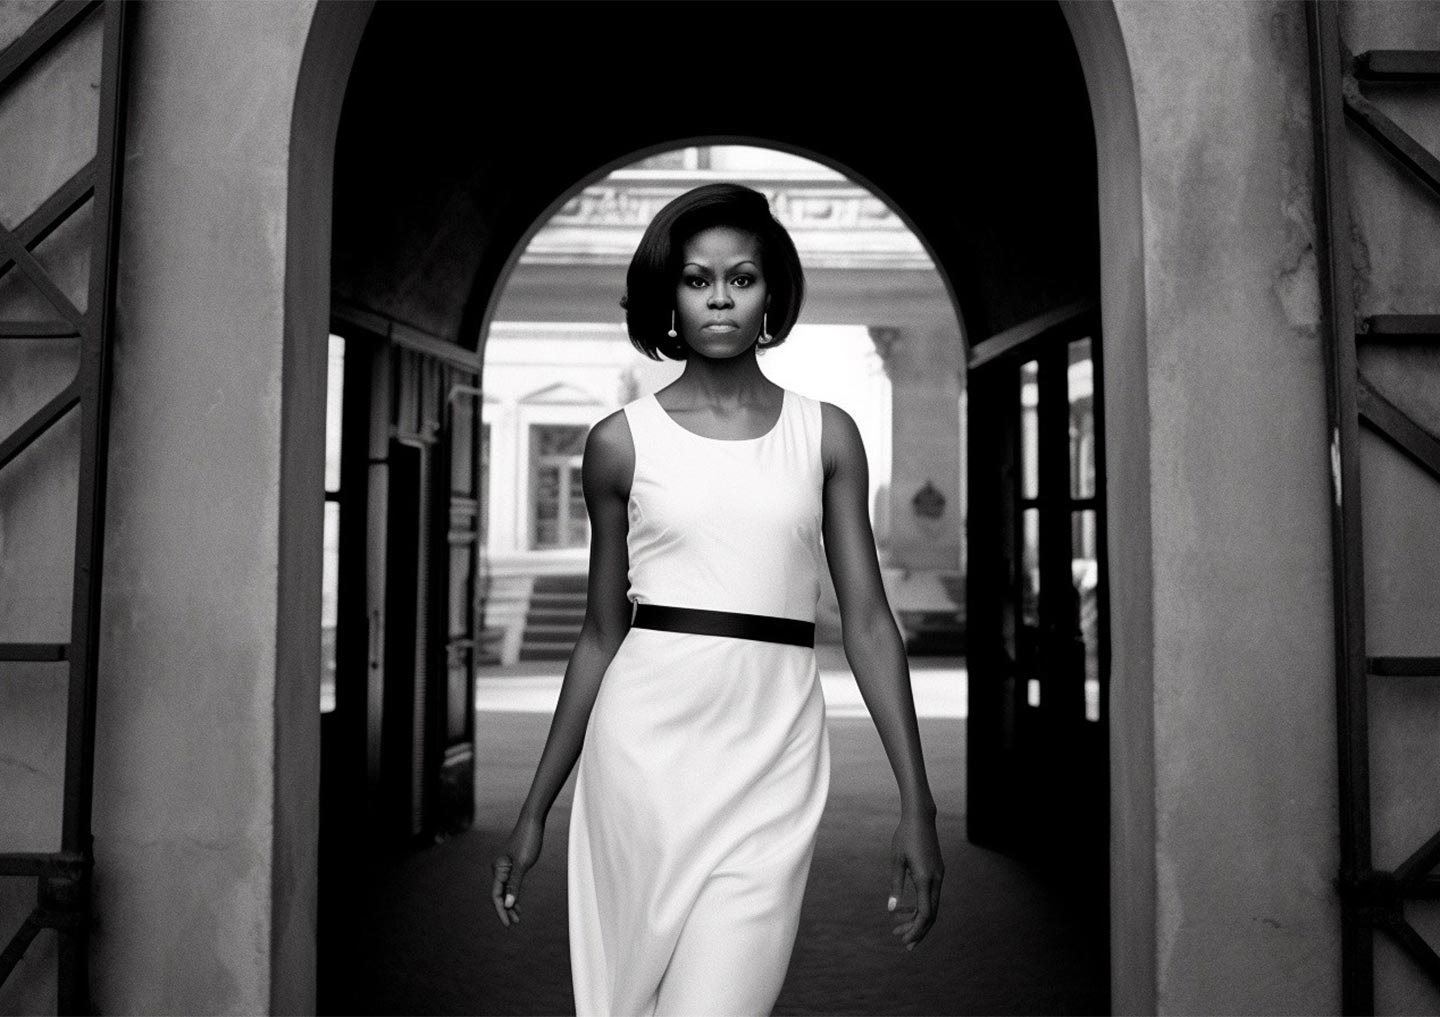 We also asked MidJourney to imagine a shot of Michelle Obama by Helmut Newton. Here you go!